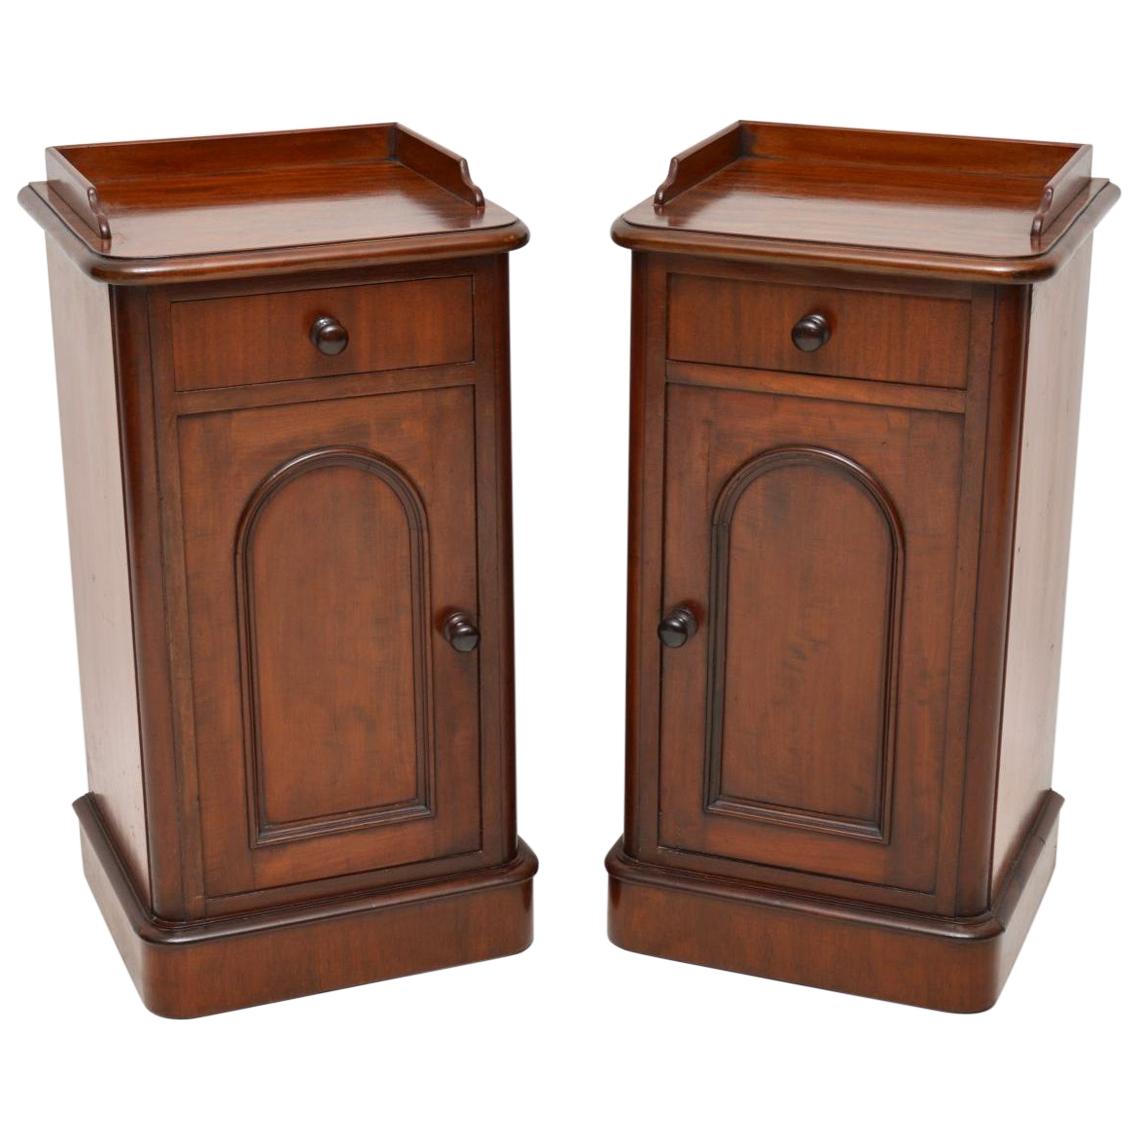 Pair of Antique Victorian Mahogany Bedside Cabinets